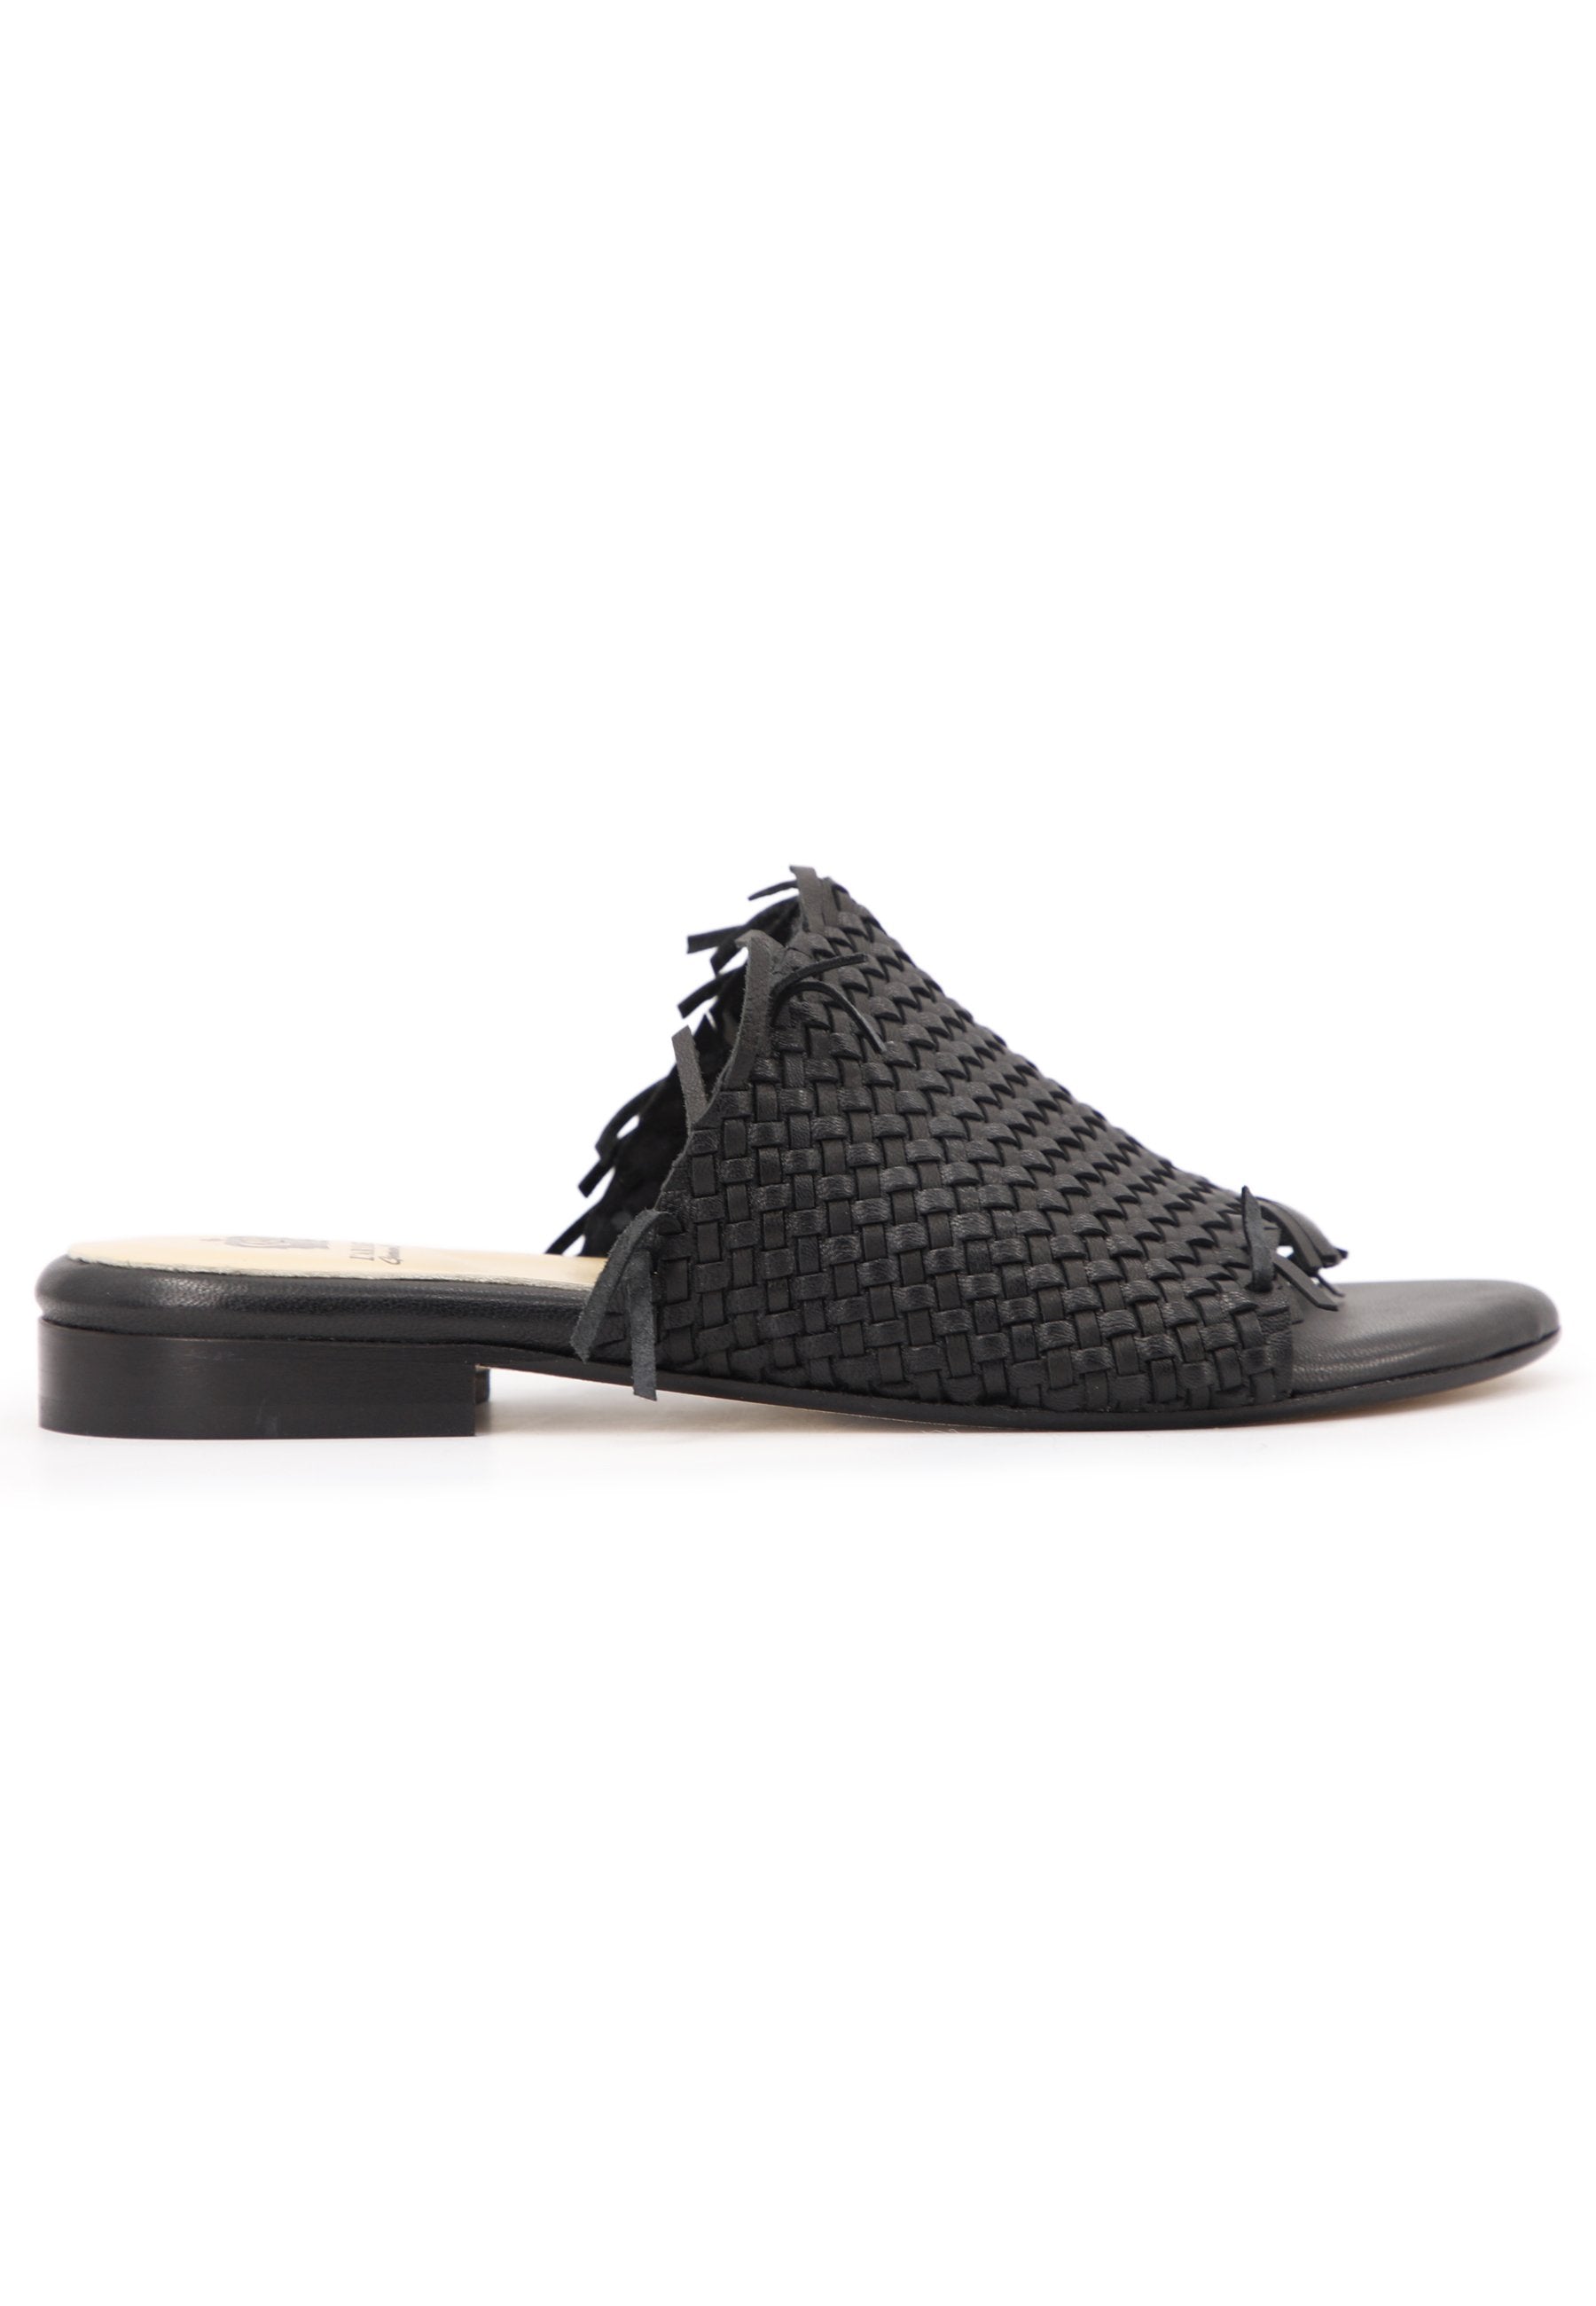 Women's flat sandals in black woven leather